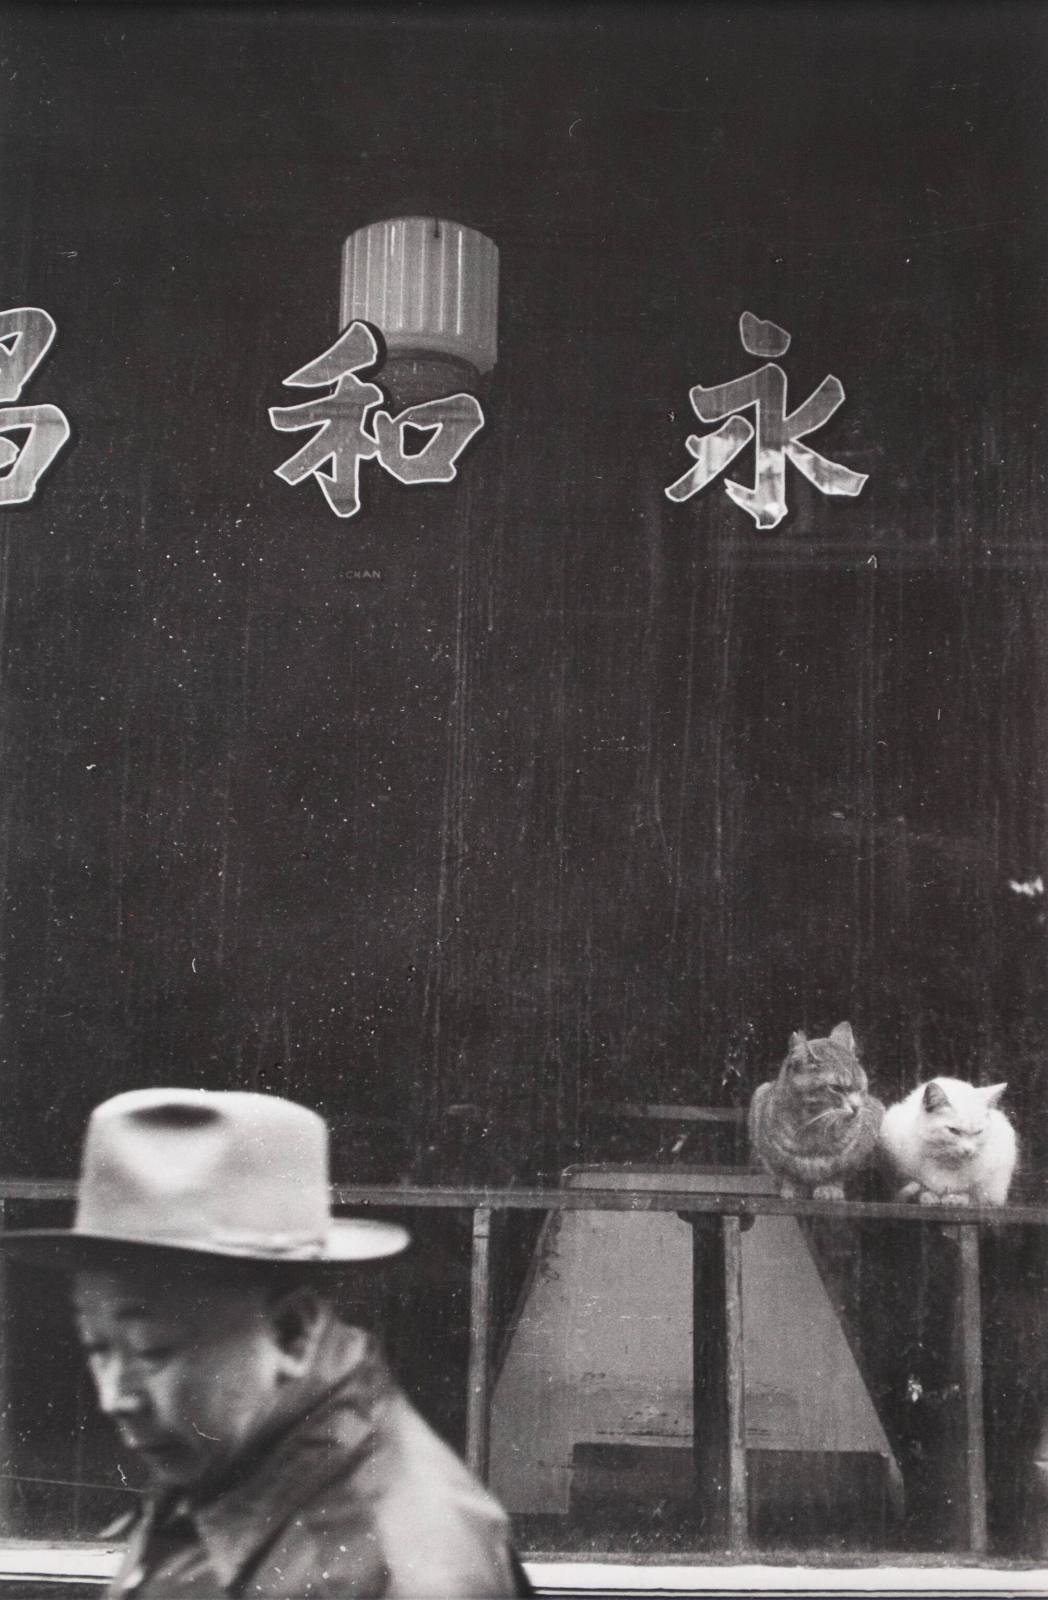 New York City [Chinese characters on store window and cats]